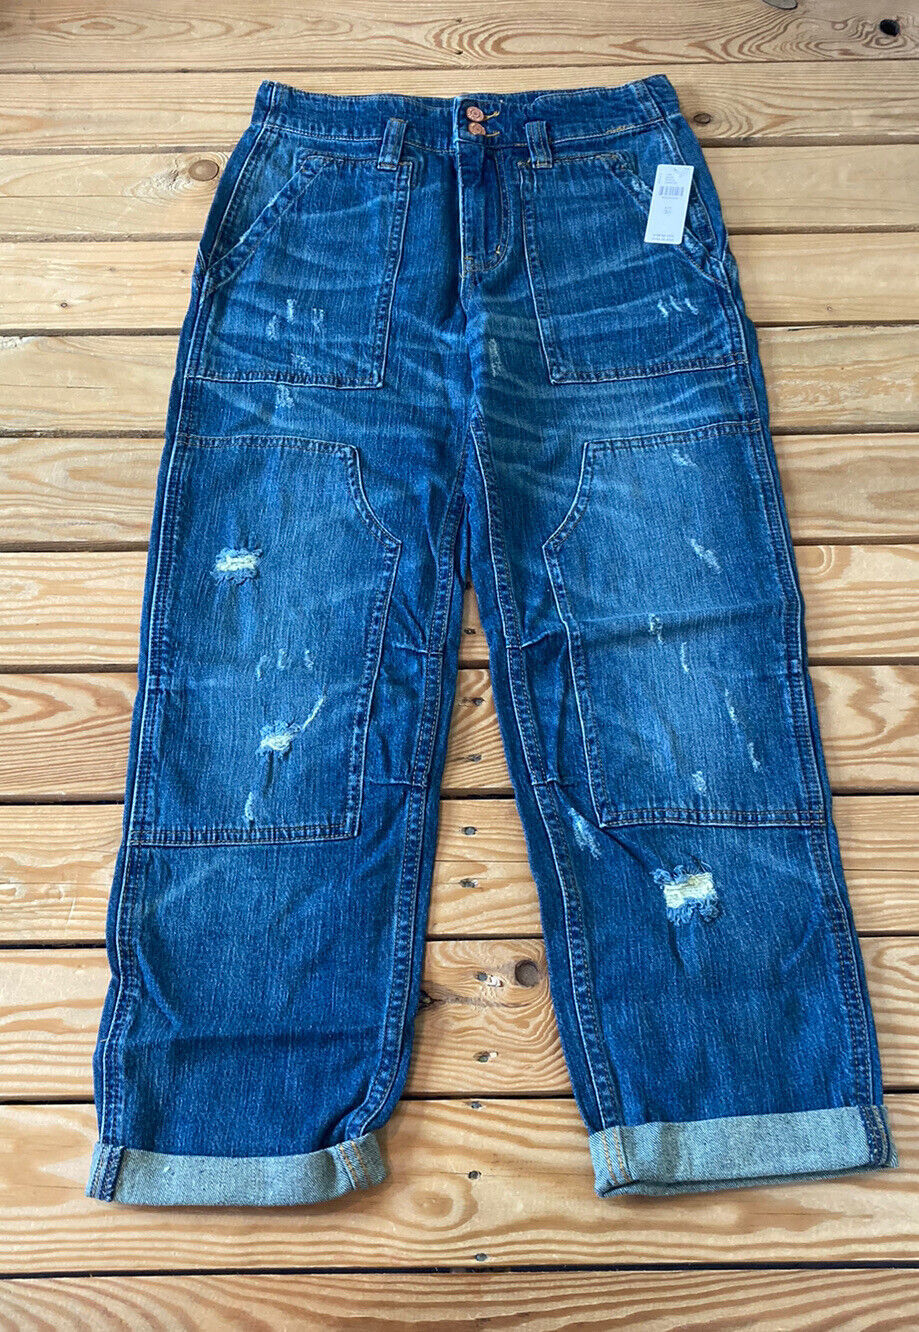 Primary image for anthropologie pilcro NWT $138 women’s roll cuff jeans Size 26 blue i7